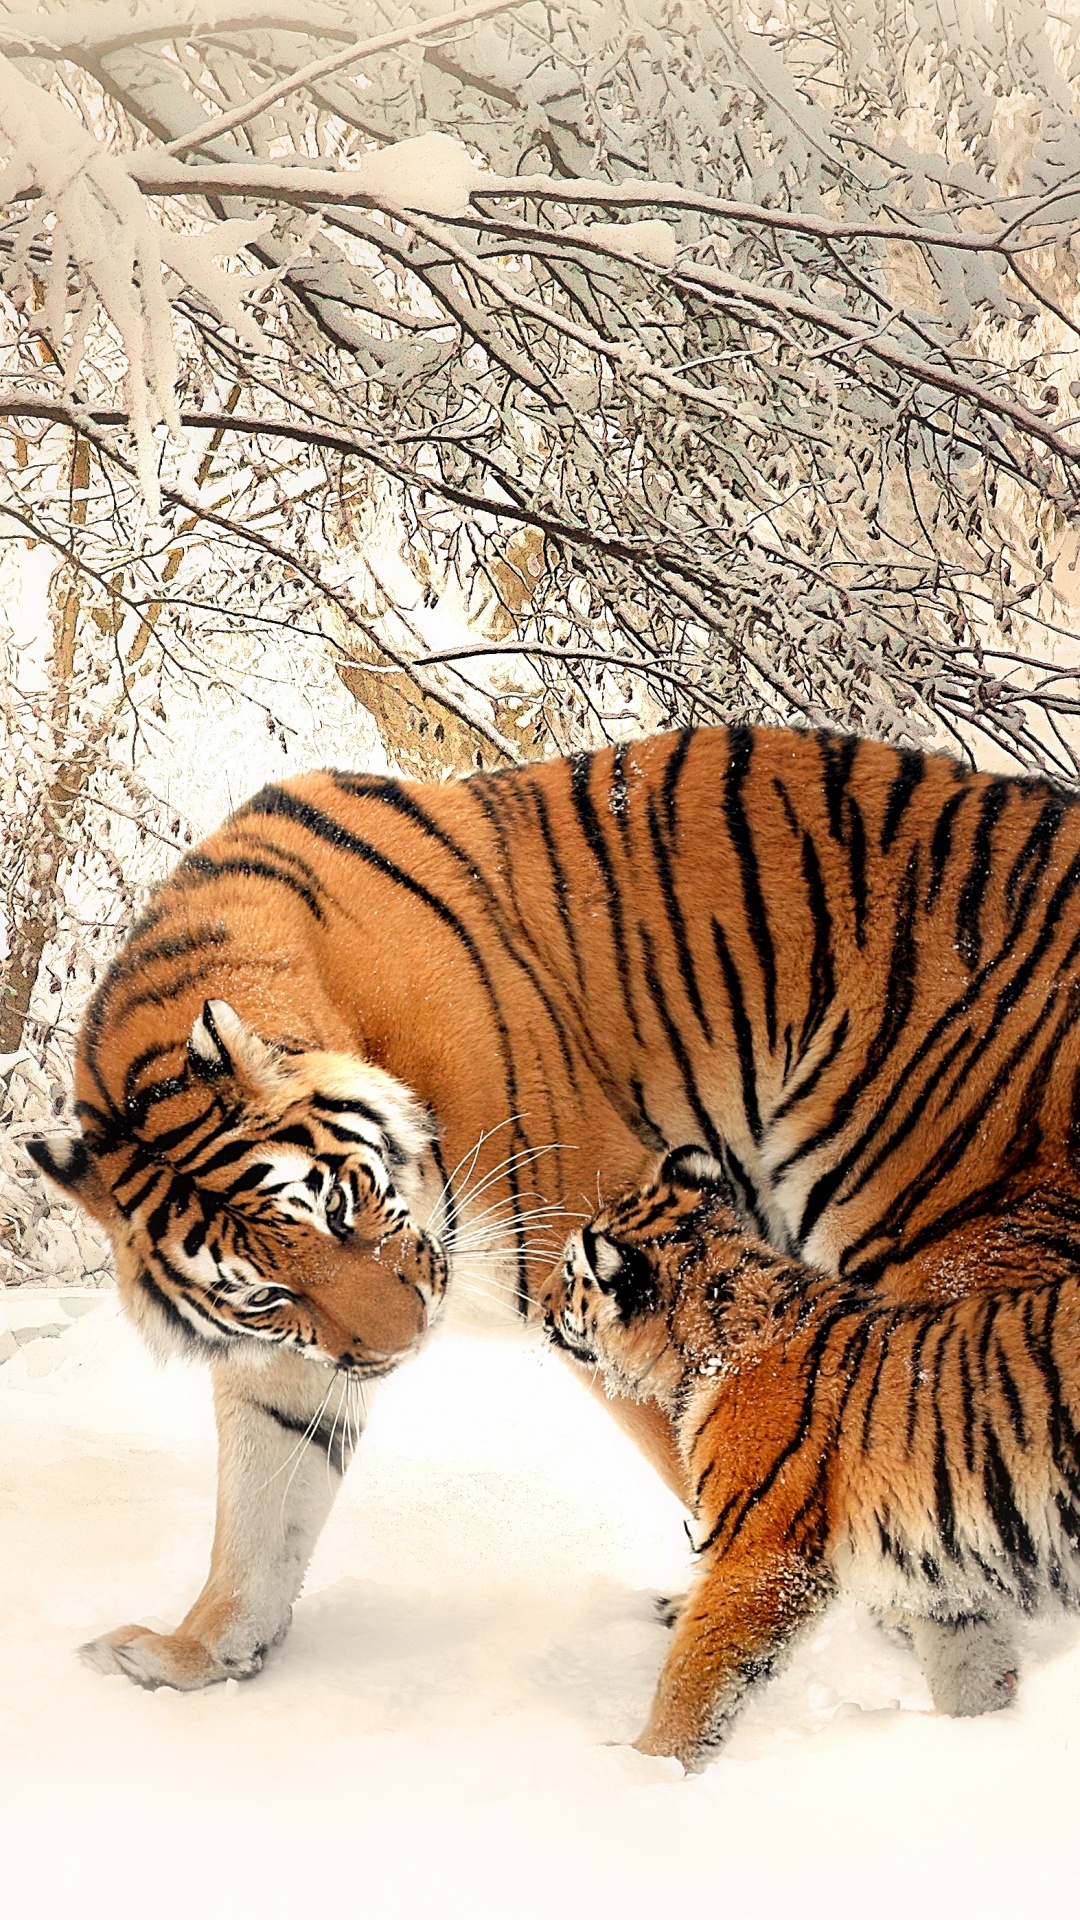 Tiger Walking on Snow Covered Ground During Daytime. Wallpaper in 1080x1920 Resolution